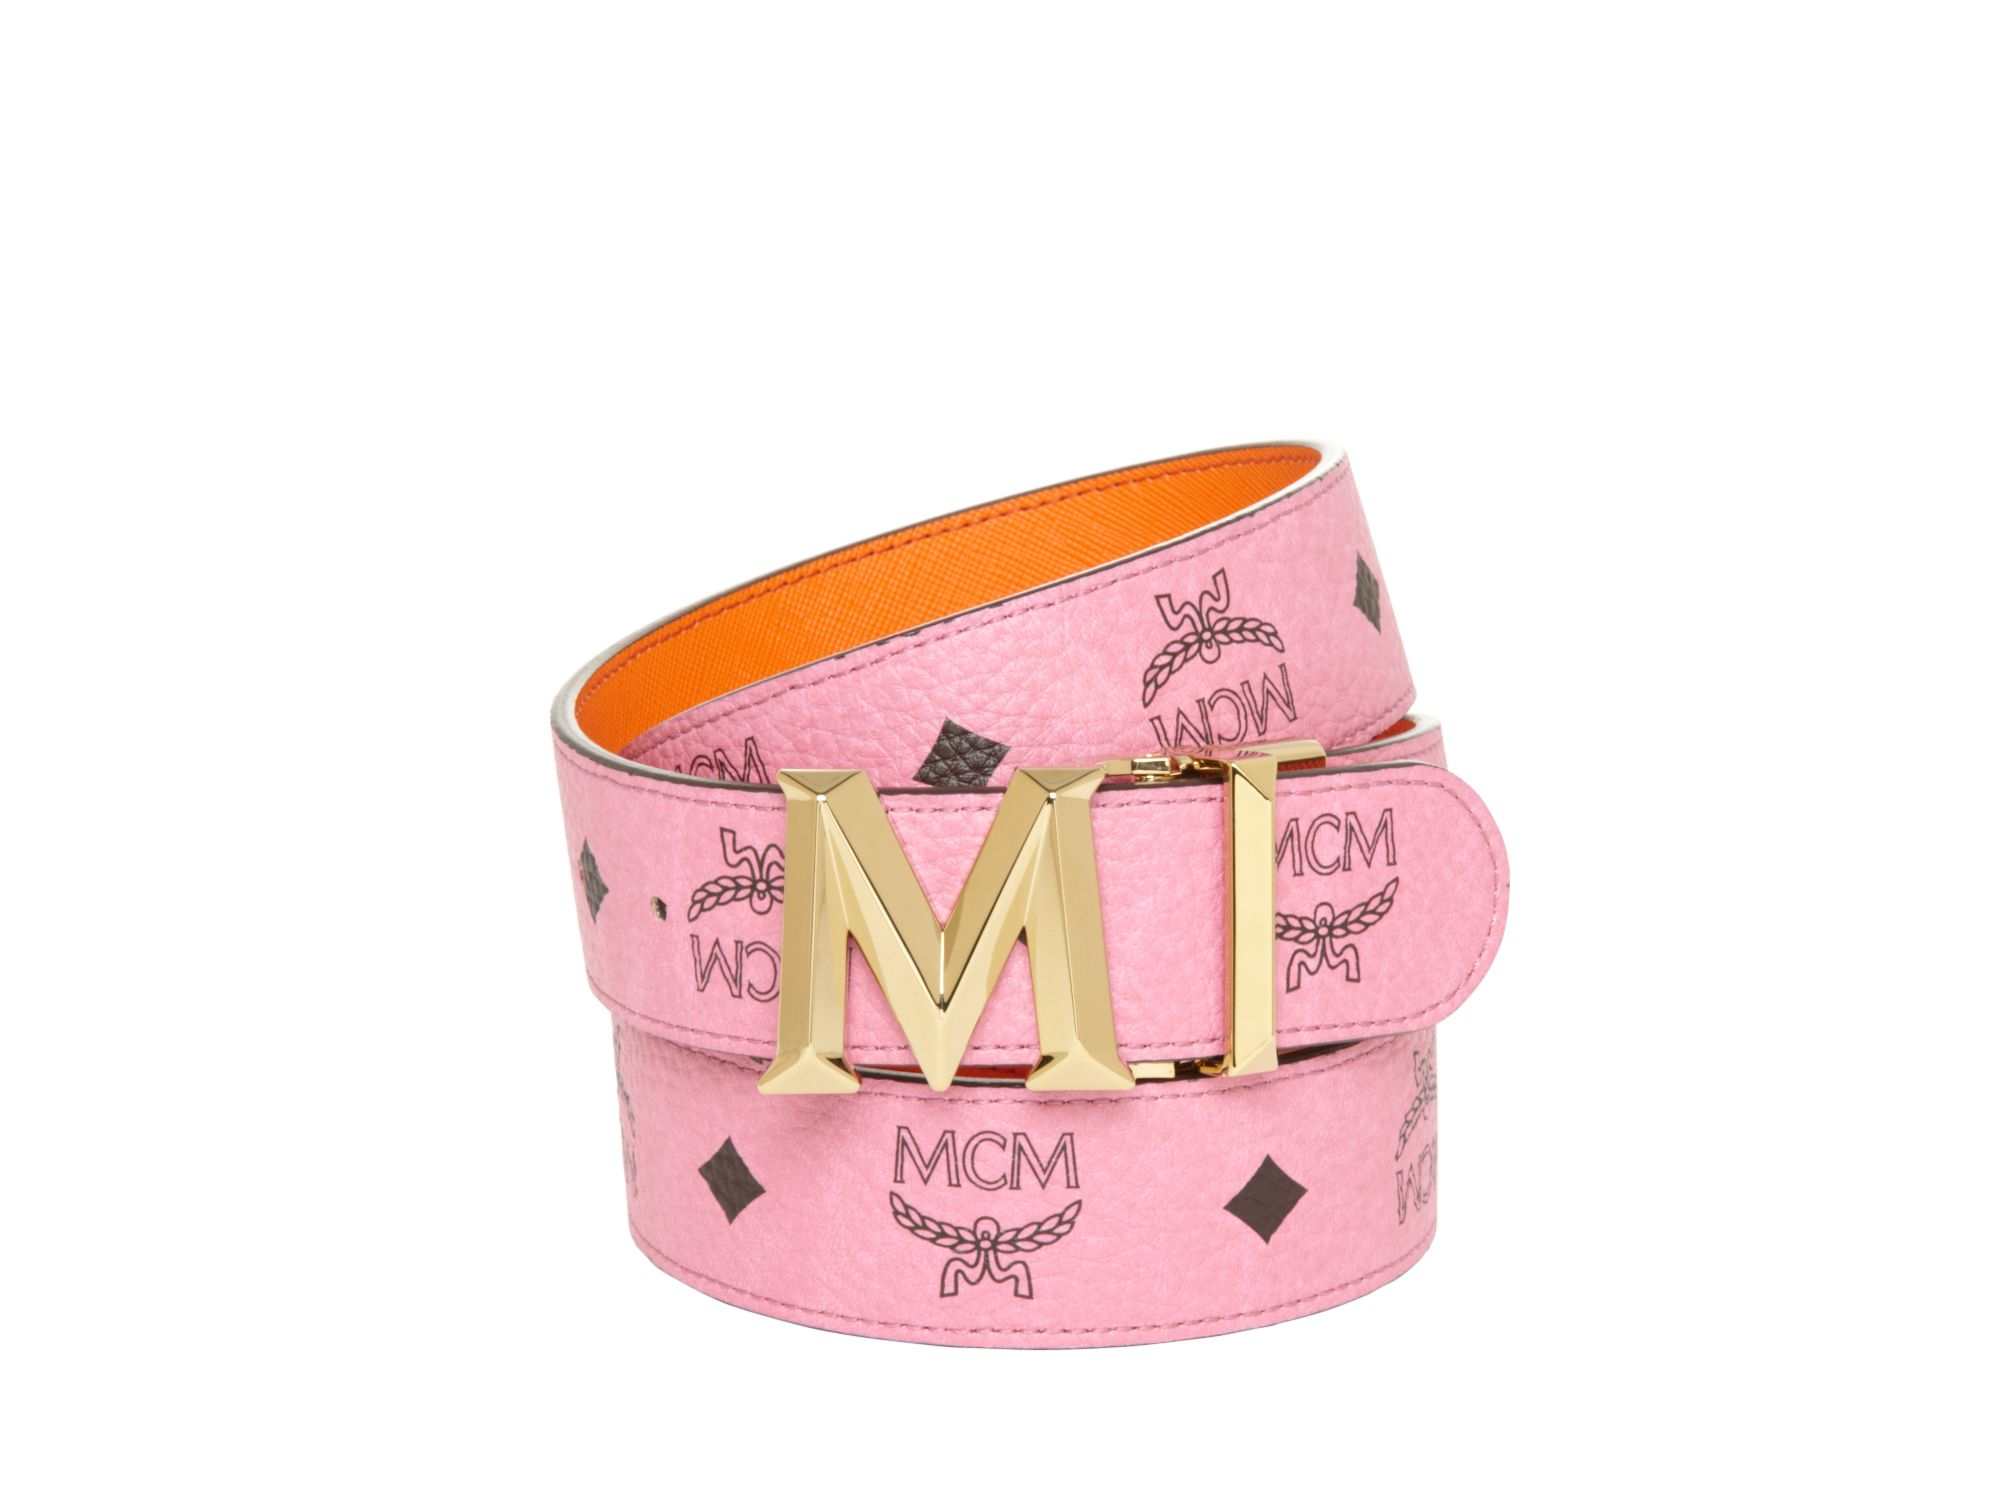 Lyst - Mcm Belt - New M Auto Reversible in Pink